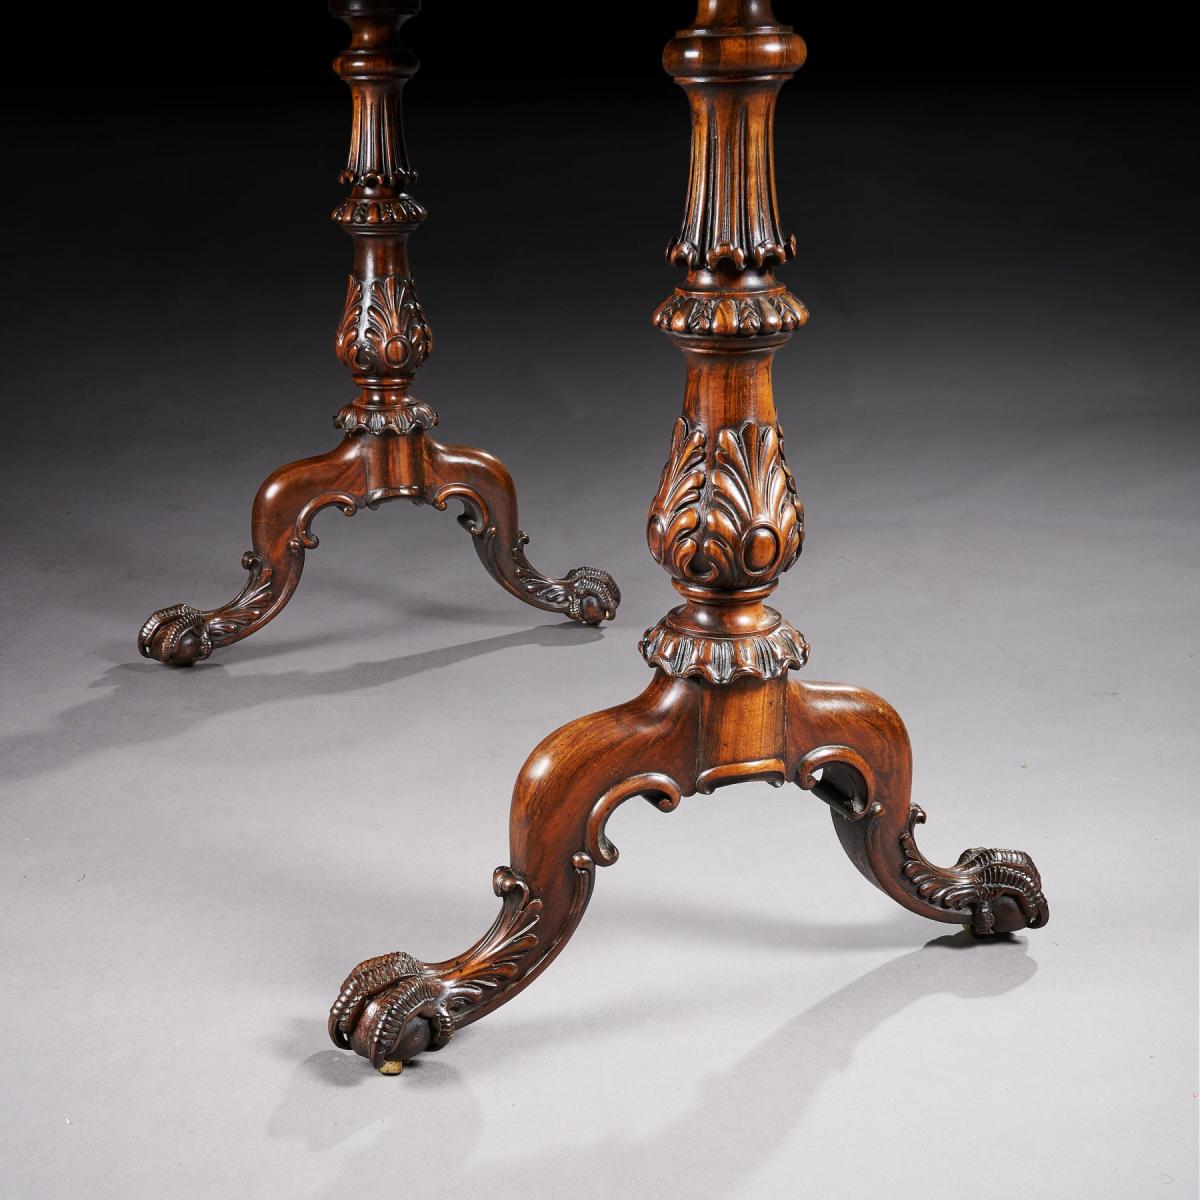 Late Regency Gillows Goncalo Alves Kidney Shaped Writing Table